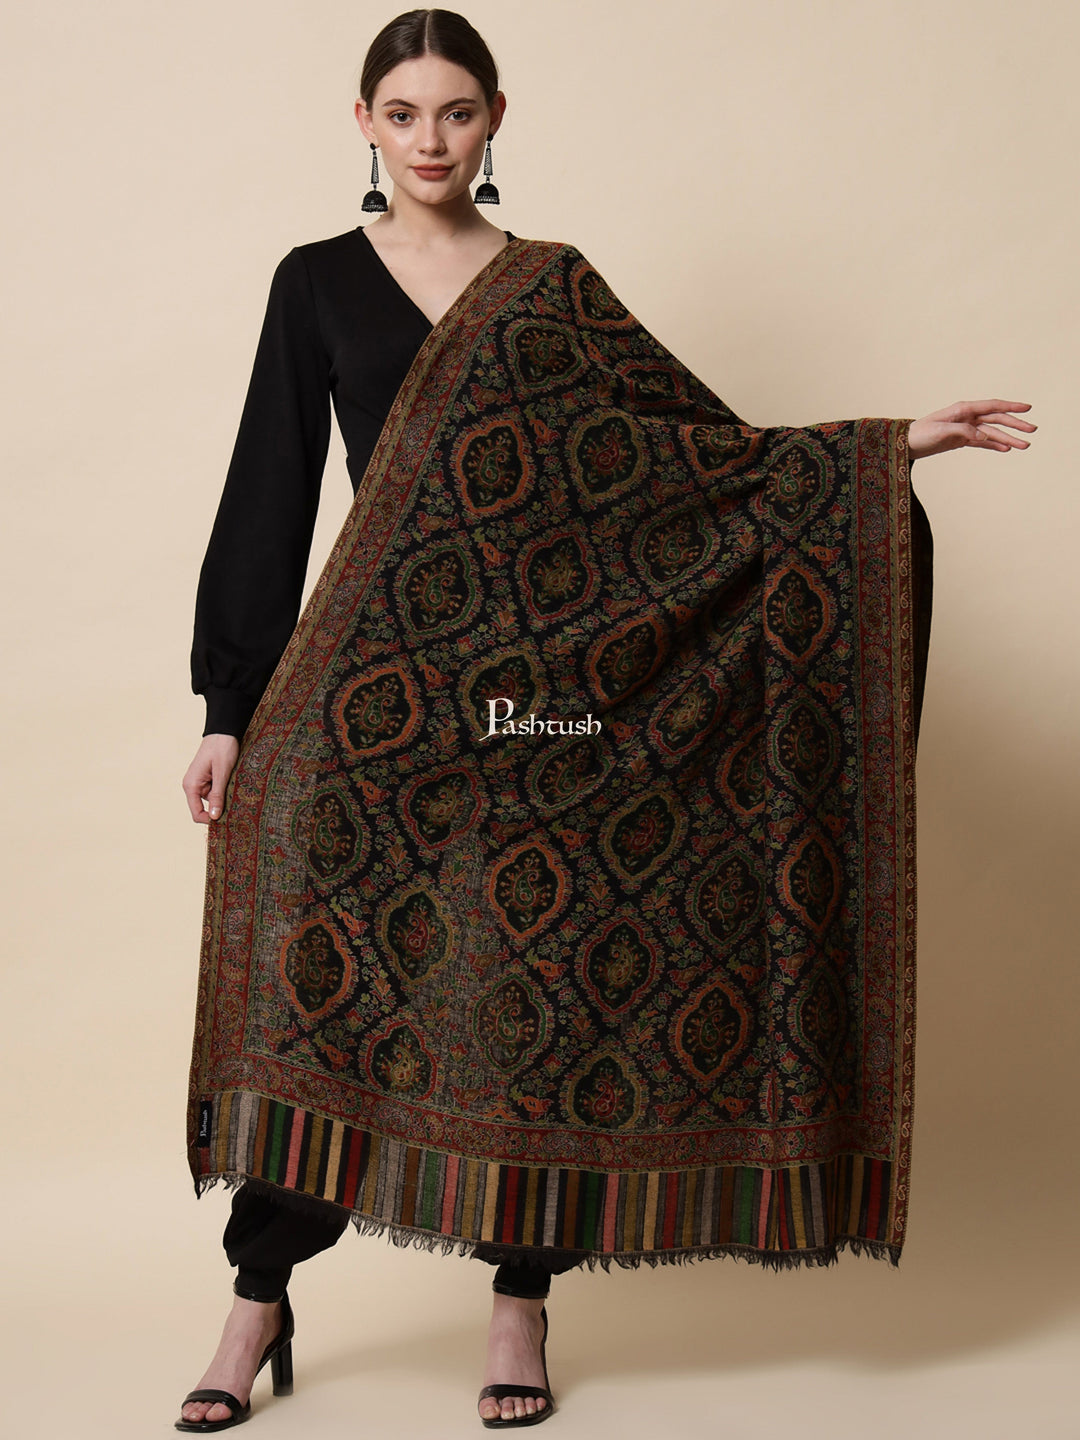 Pashtush India Gift Pack Pashtush His And Her Gift Set Of Pure Wool Reversible Stole And Extra Fine Ethnic Shawl With Wooden Chester Box, Multicolour